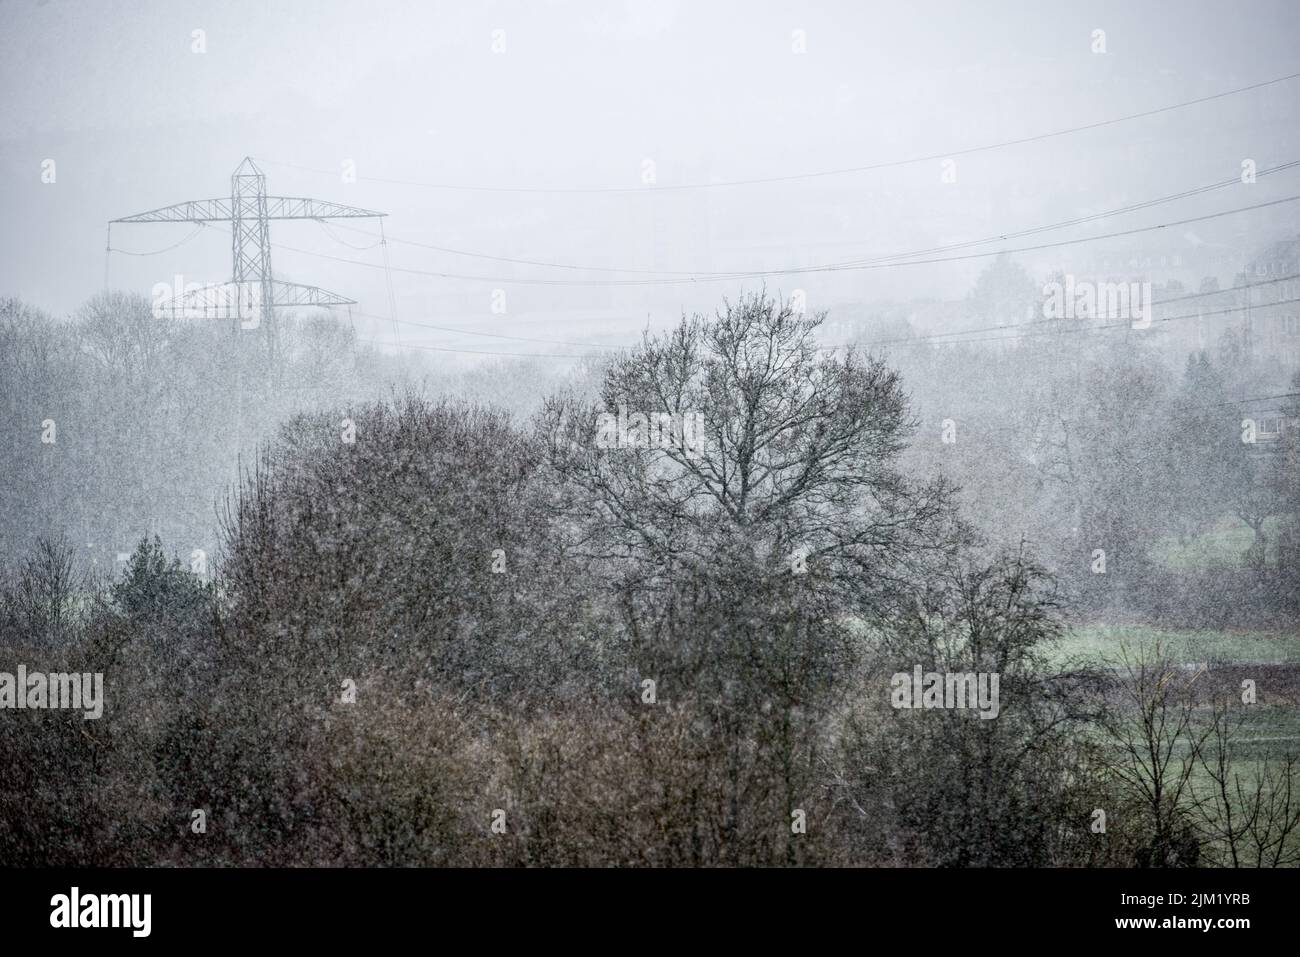 Electricity pylons in winter snow Stock Photo